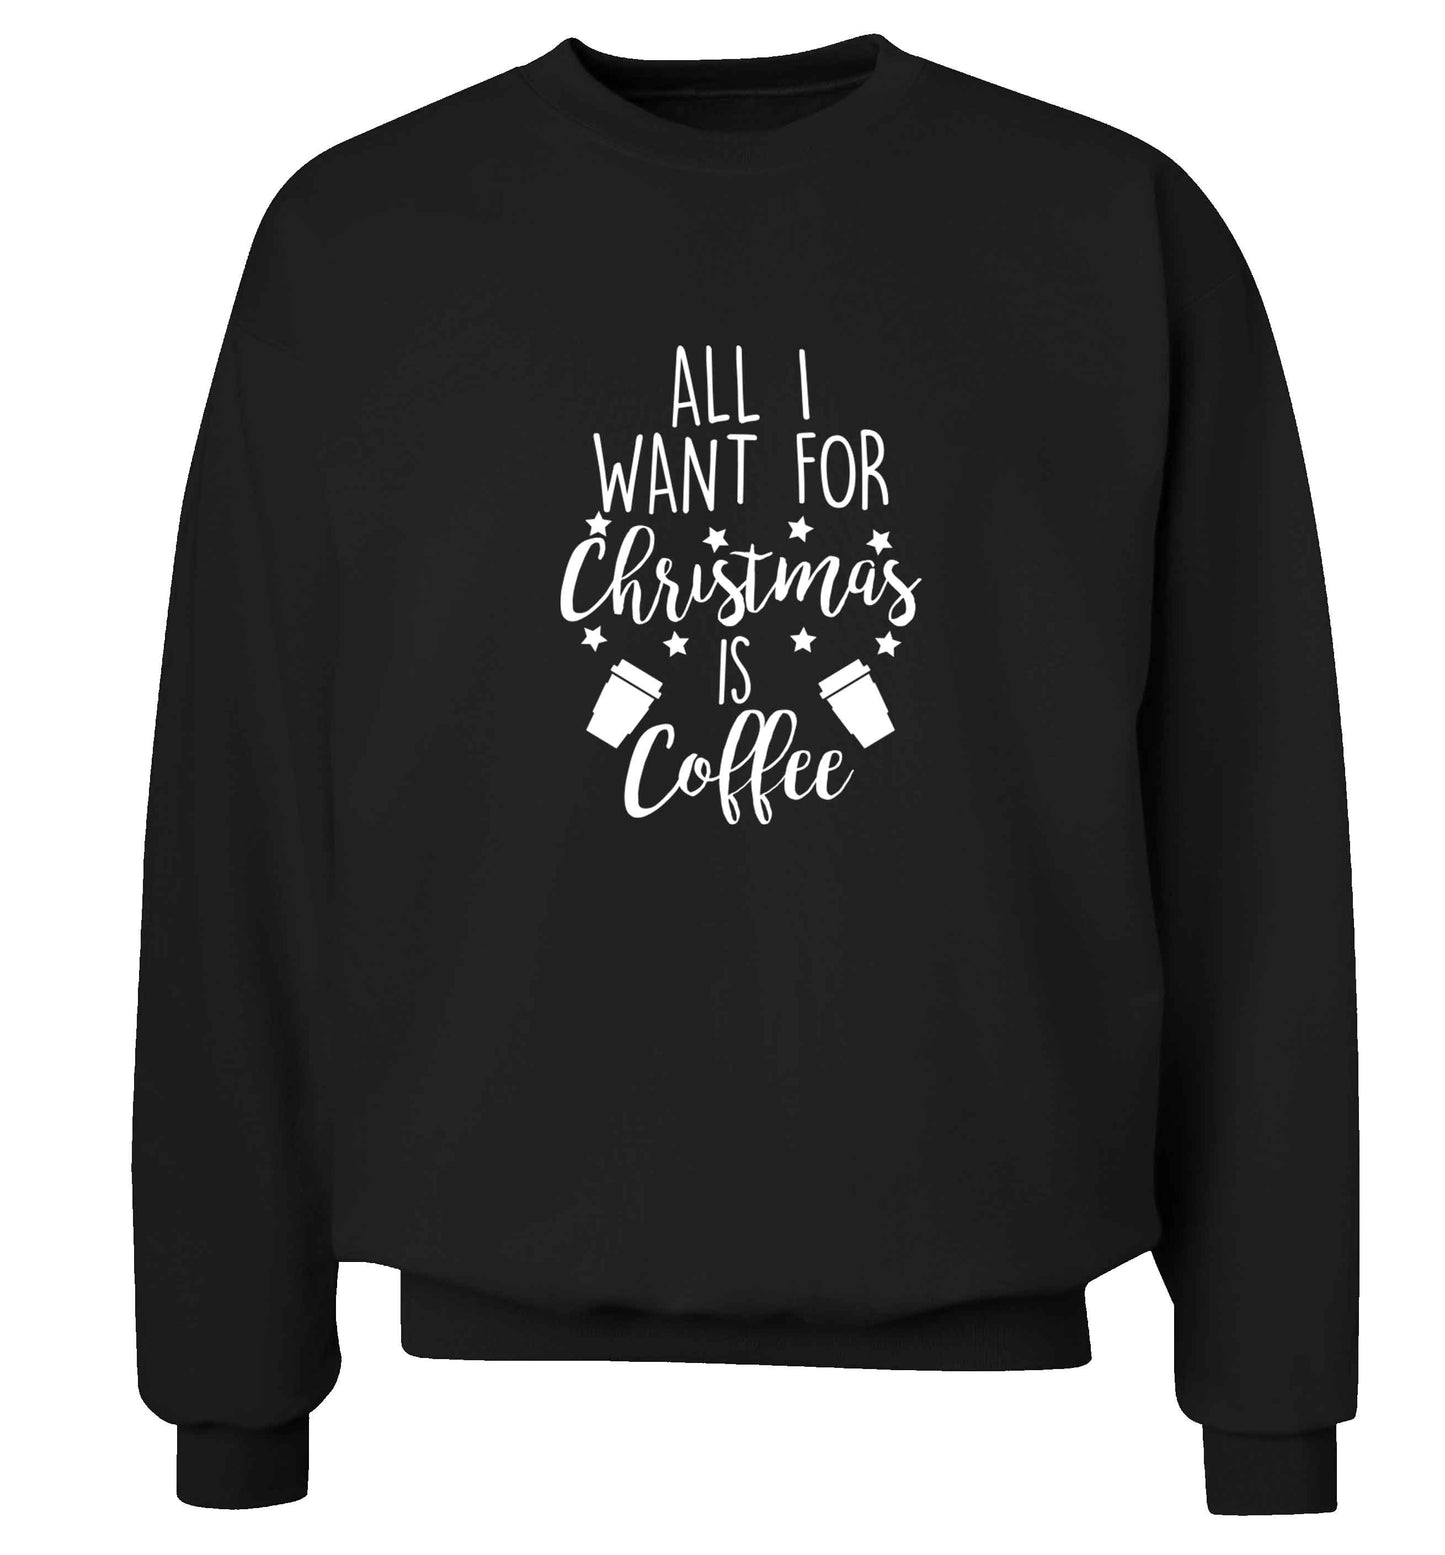 All I want for Christmas is coffee Adult's unisex black Sweater 2XL